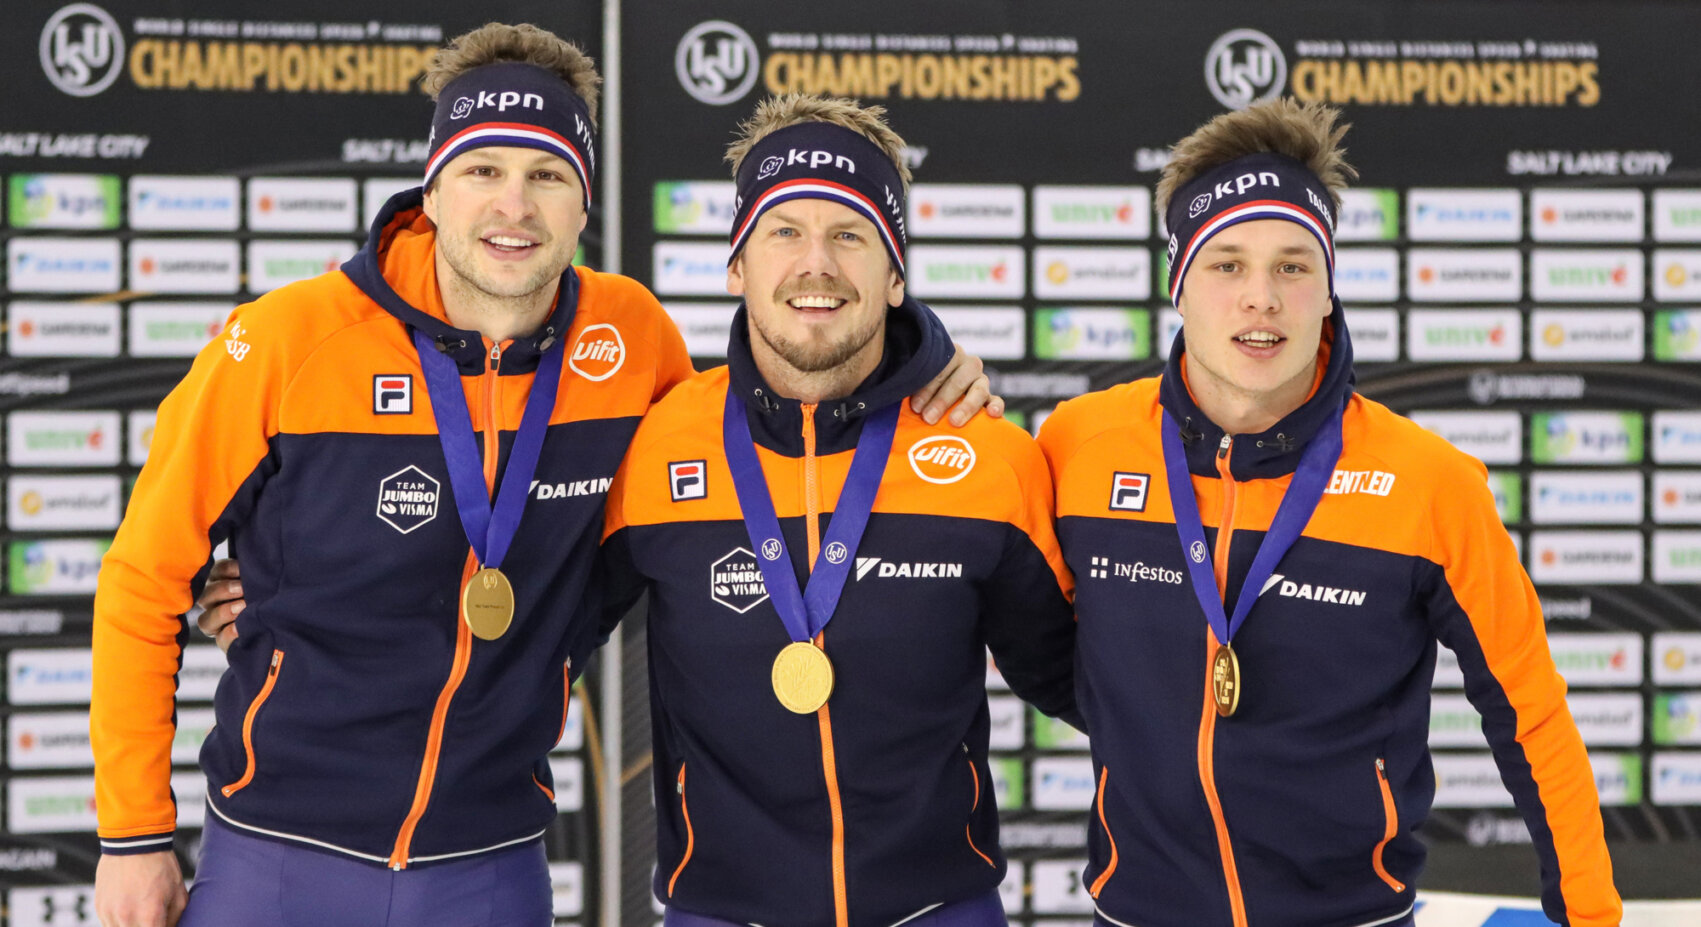 Dutch men break world record to win another world title in Team Pursuit	